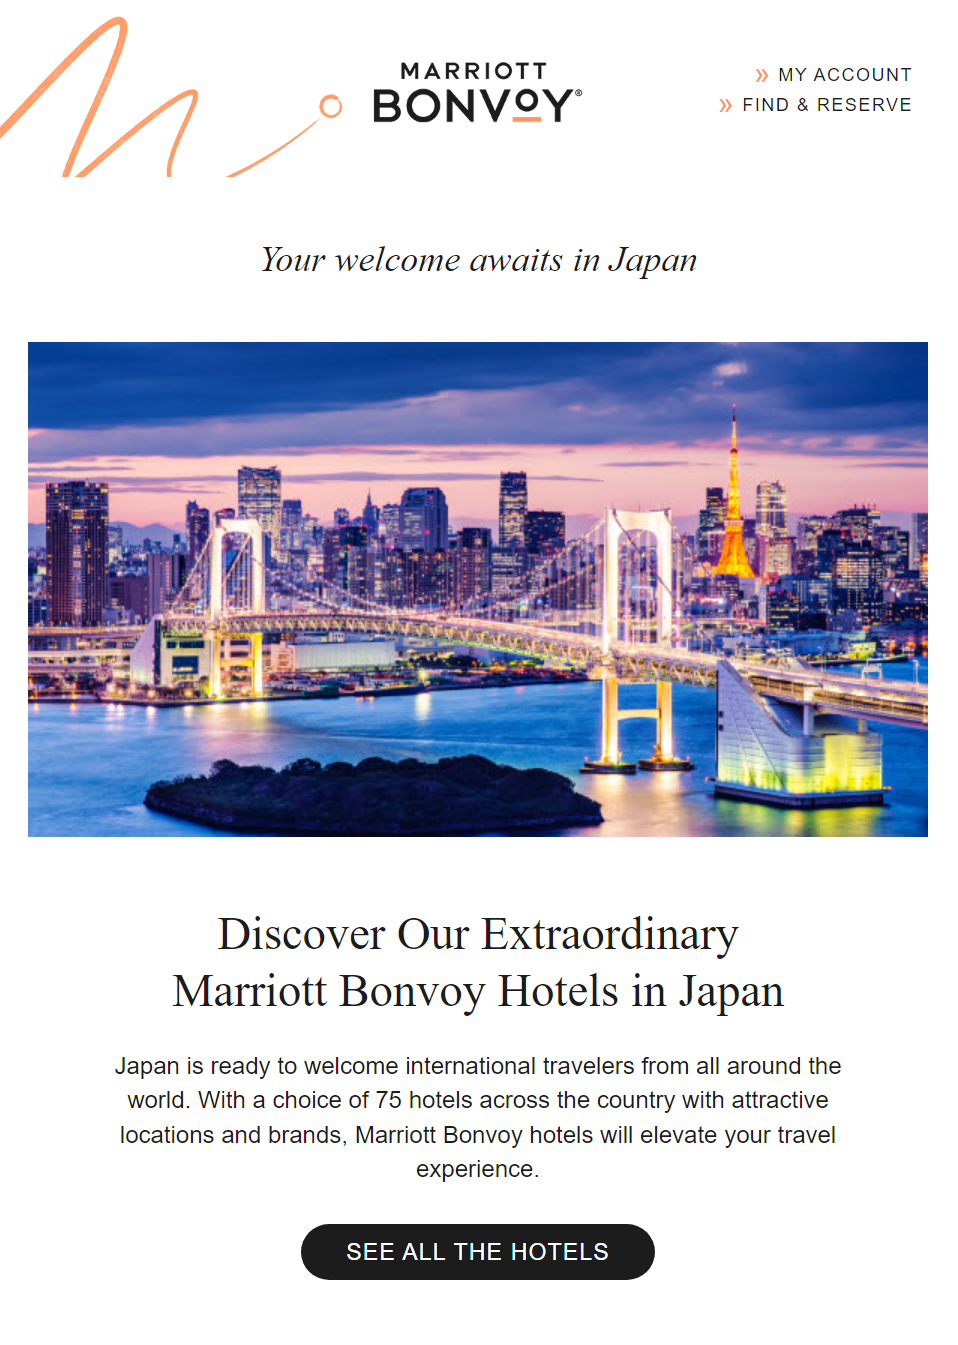 Email marketing copy example from Marriott Bonvoy